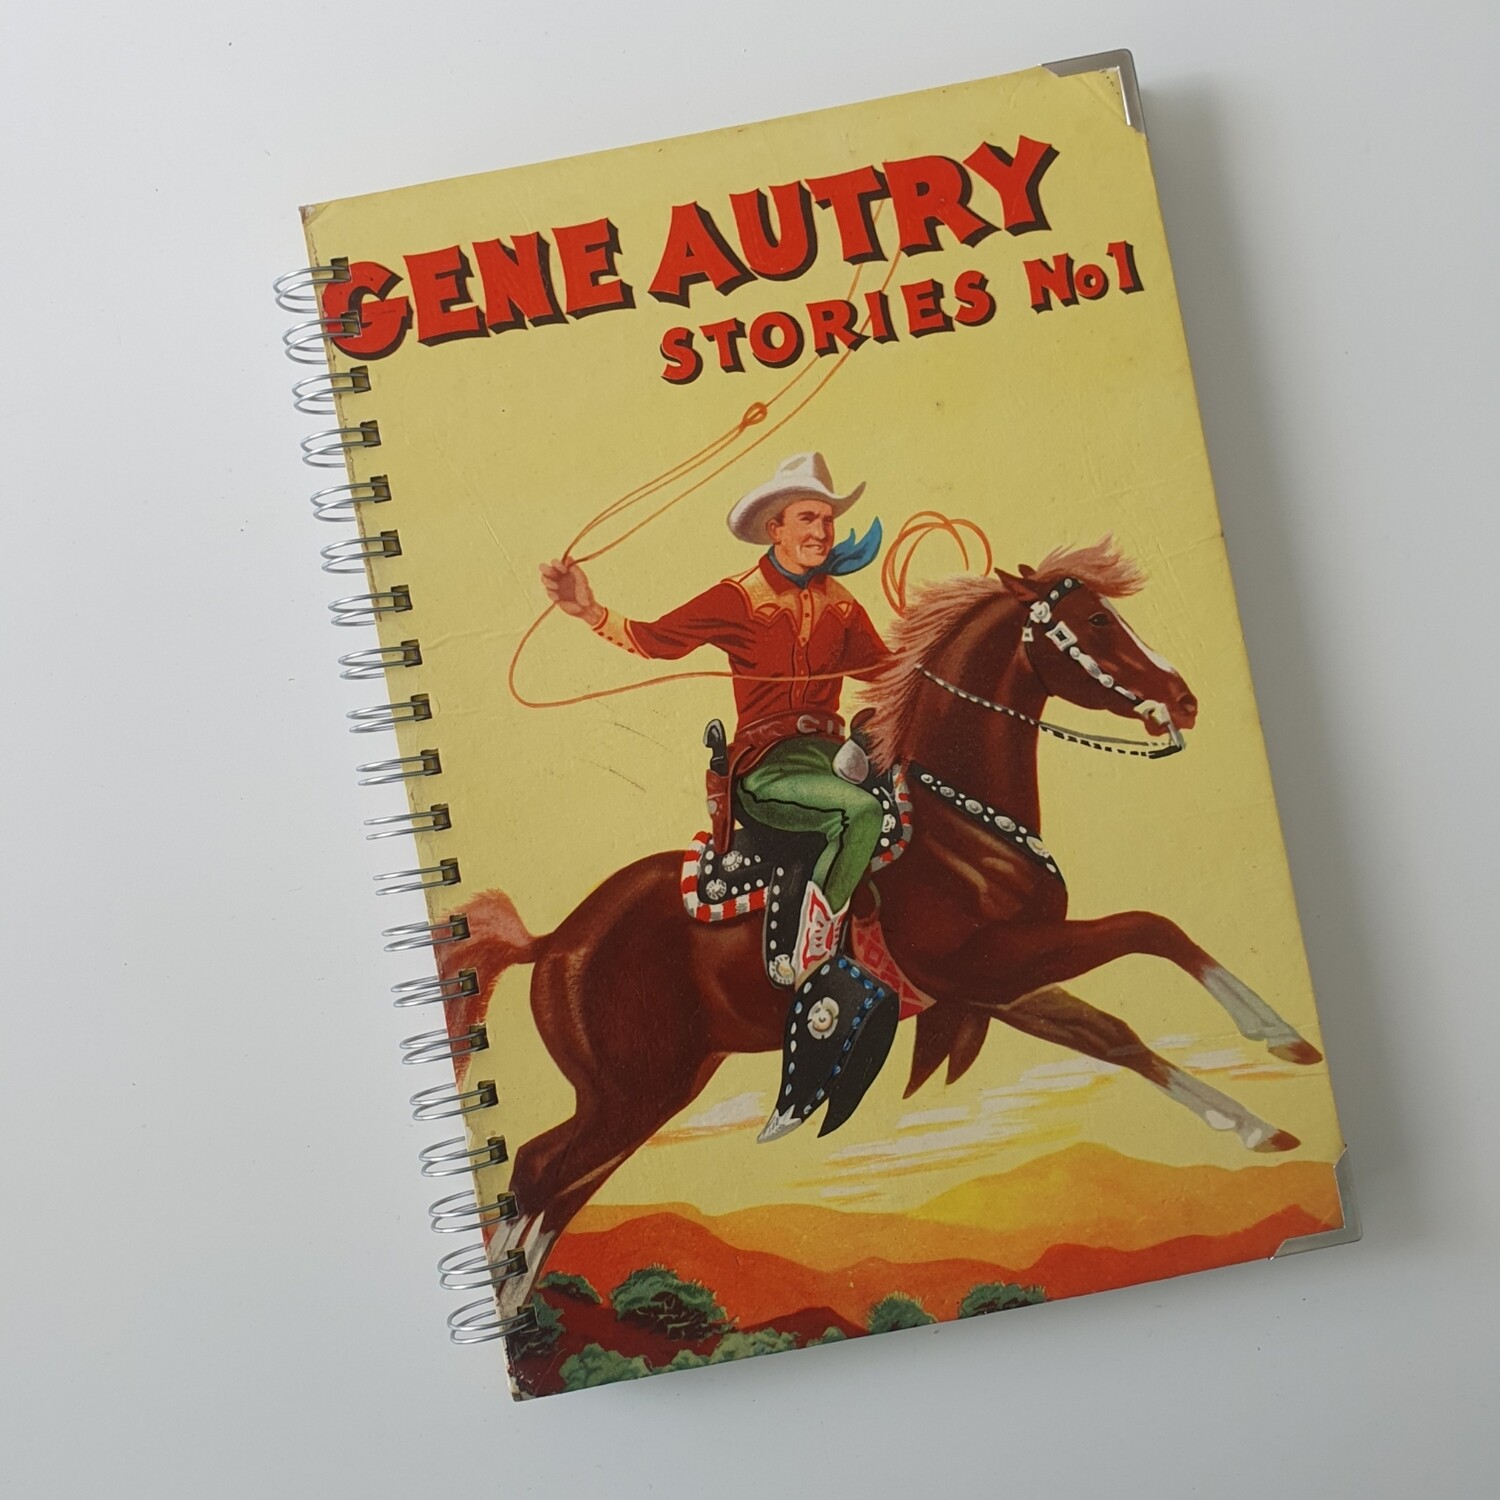 Gene Autry Stories, cowboy, horse,  plain paper notebook,  comes with metal book corners